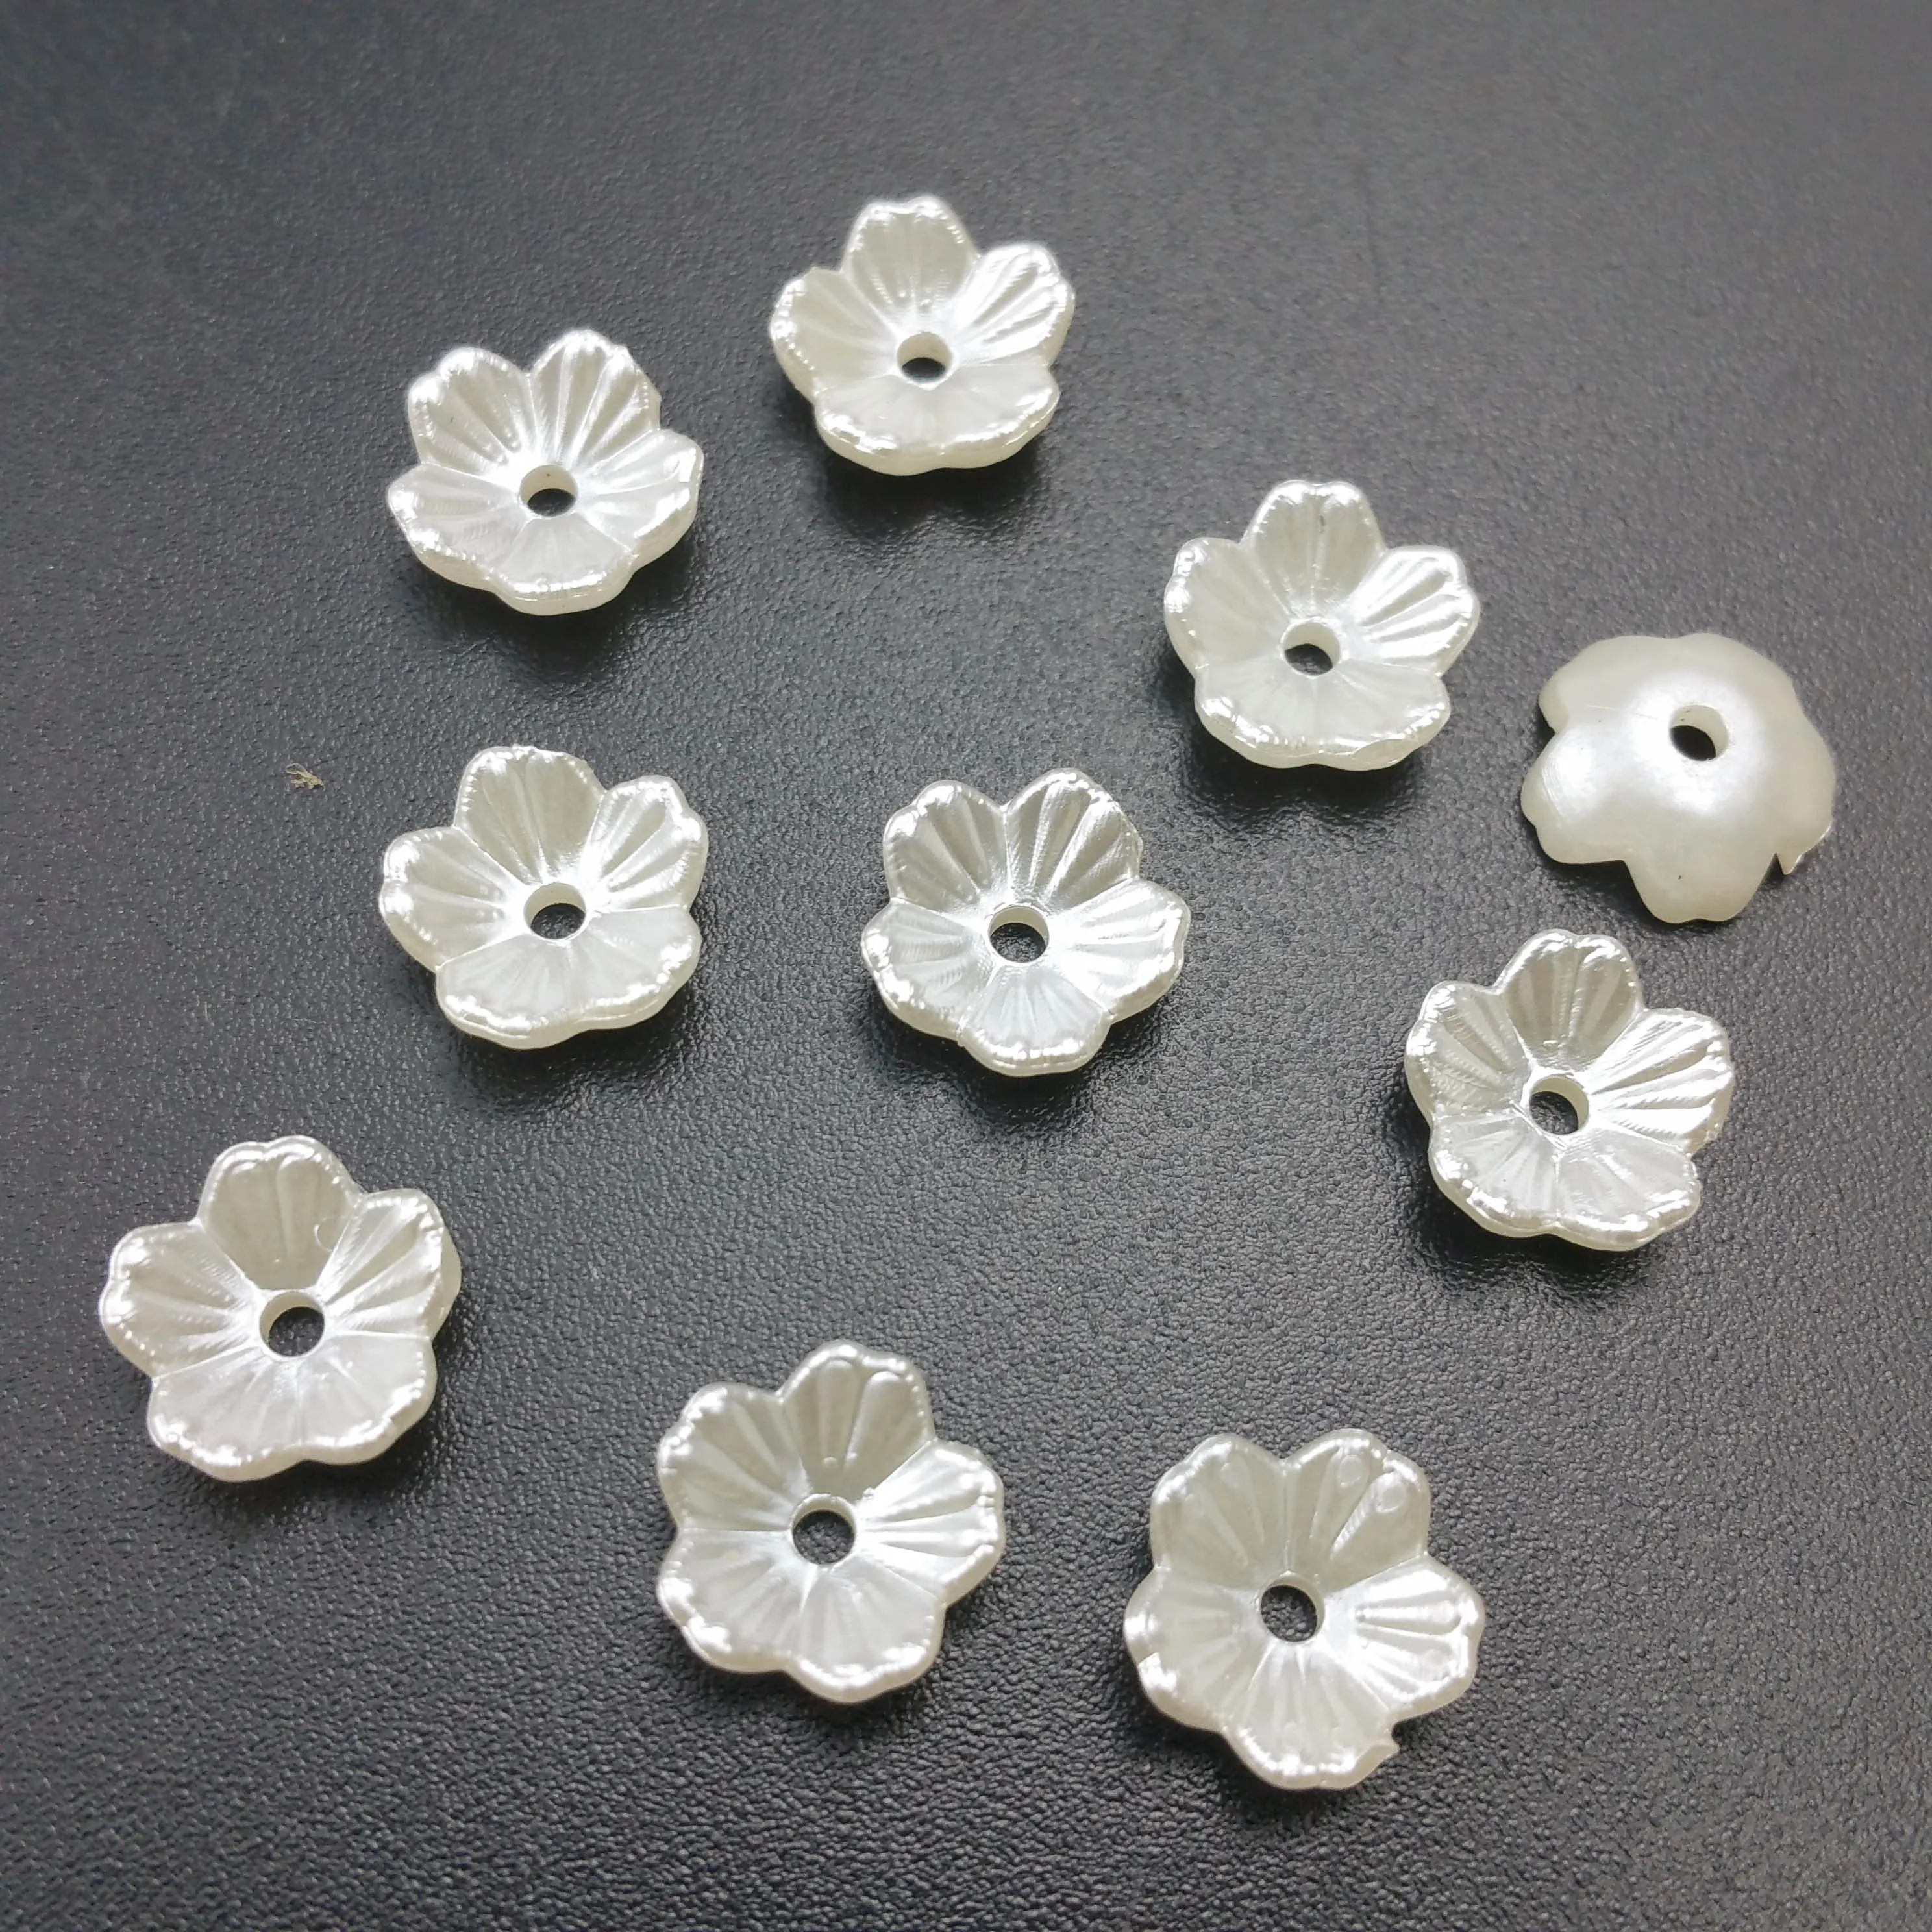 

50pcs/Lot 8 /10mm Flower Loose Spacer Bead Caps Cone End Beads Cap Filigree For DIY Jewelry Finding Making